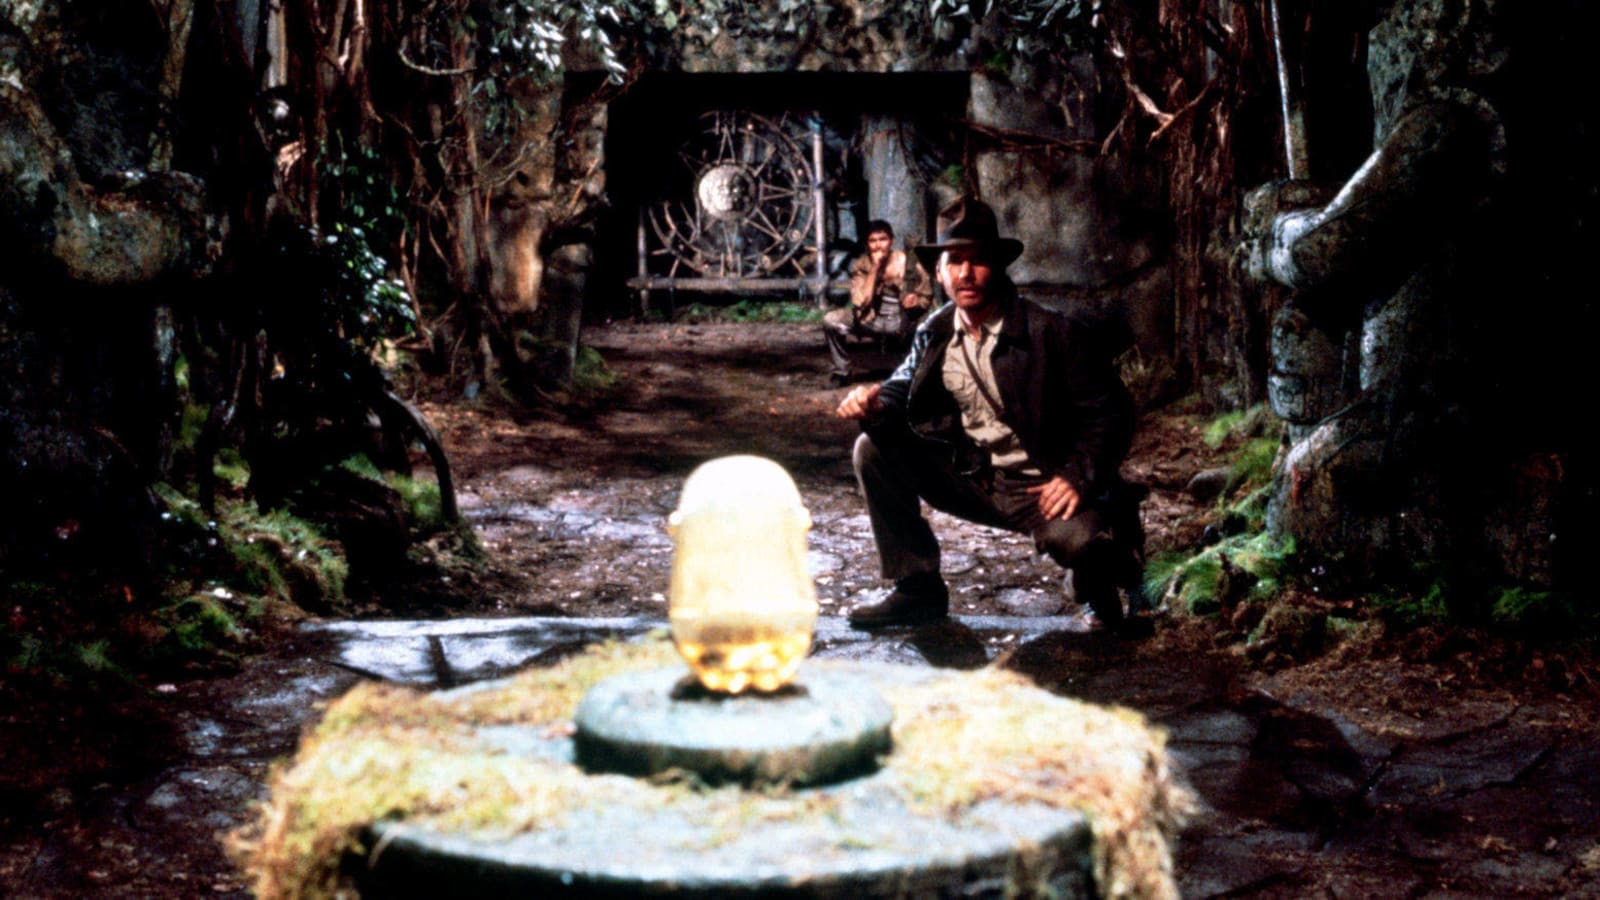 20 facts you might not know about 'Raiders of the Lost Ark'